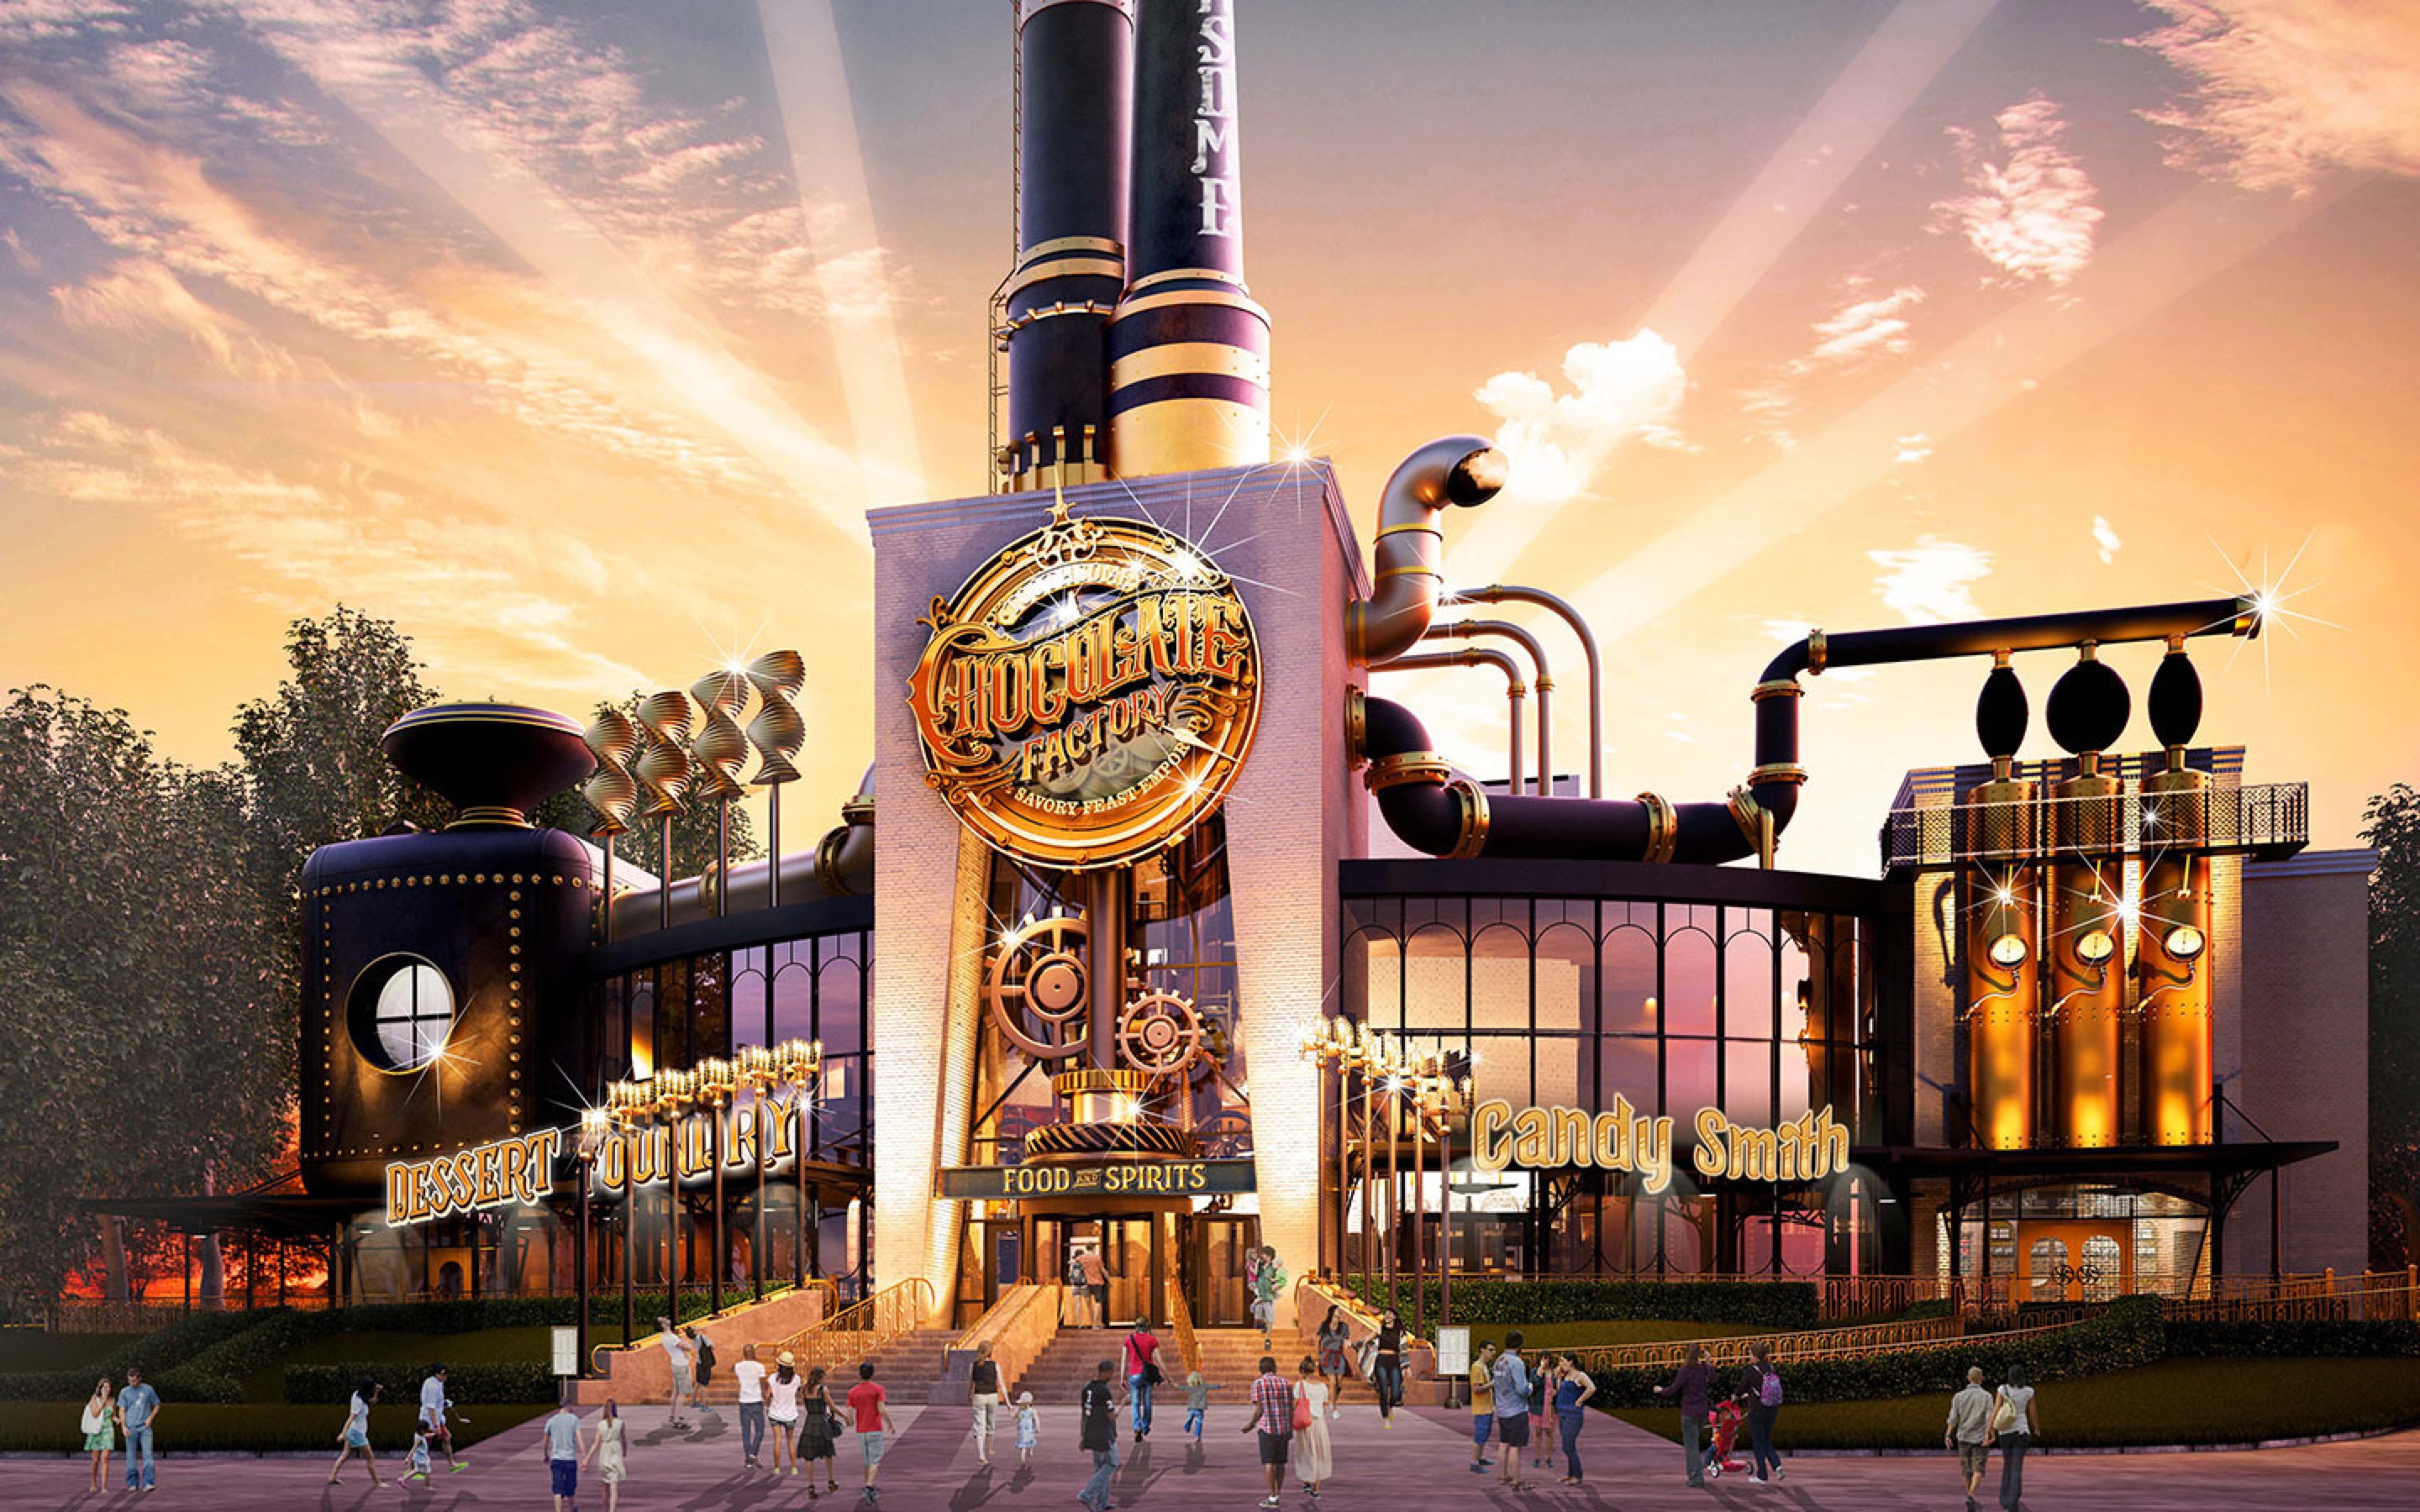 universal-building-real-life-willy-wonka-s-chocolate-factory-broadway